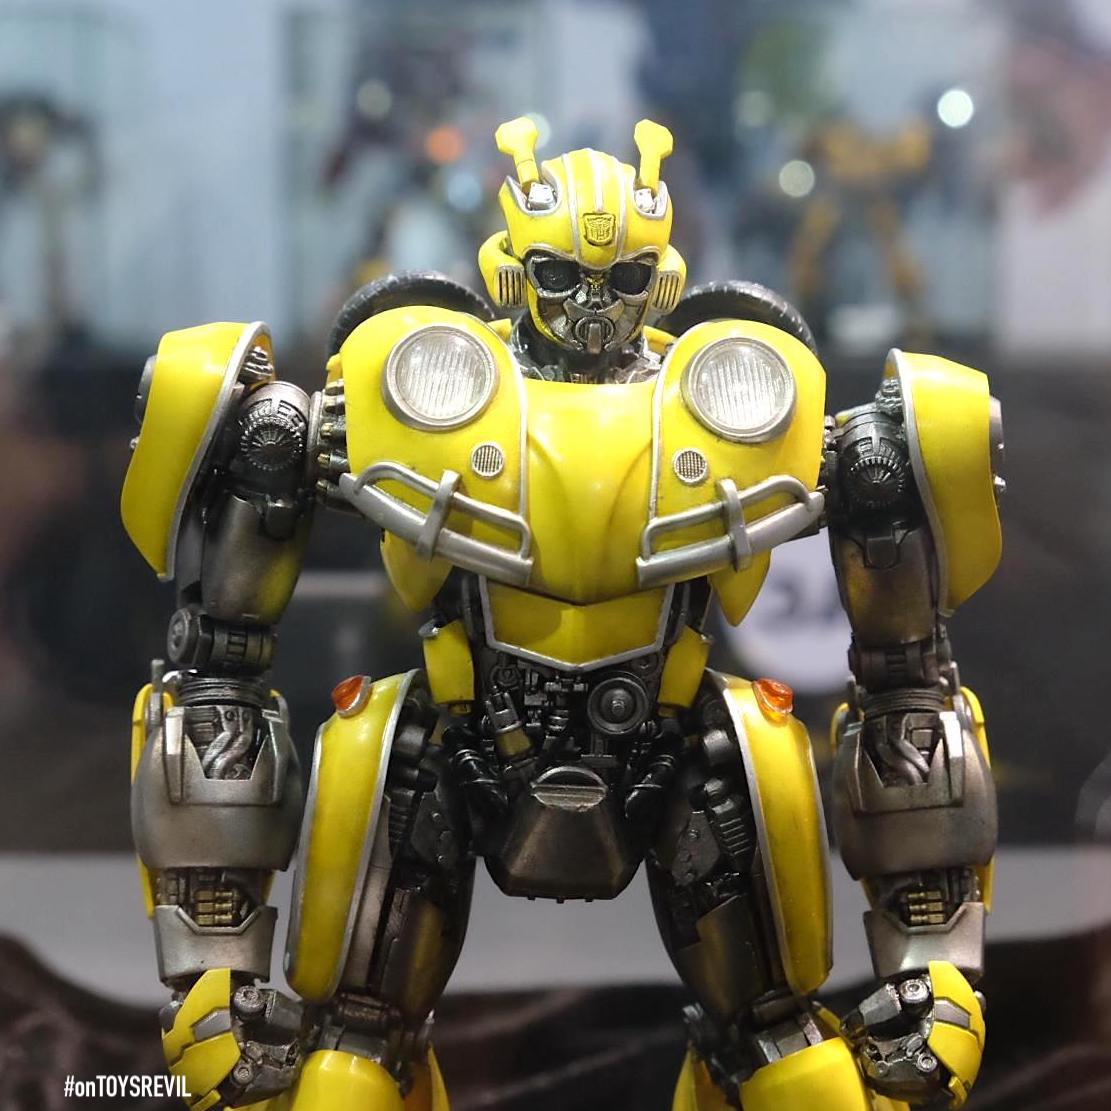 Kaiyodo Legacy of Revoltech Transformers Bumblebee Figure 5000 Japan for sale online 